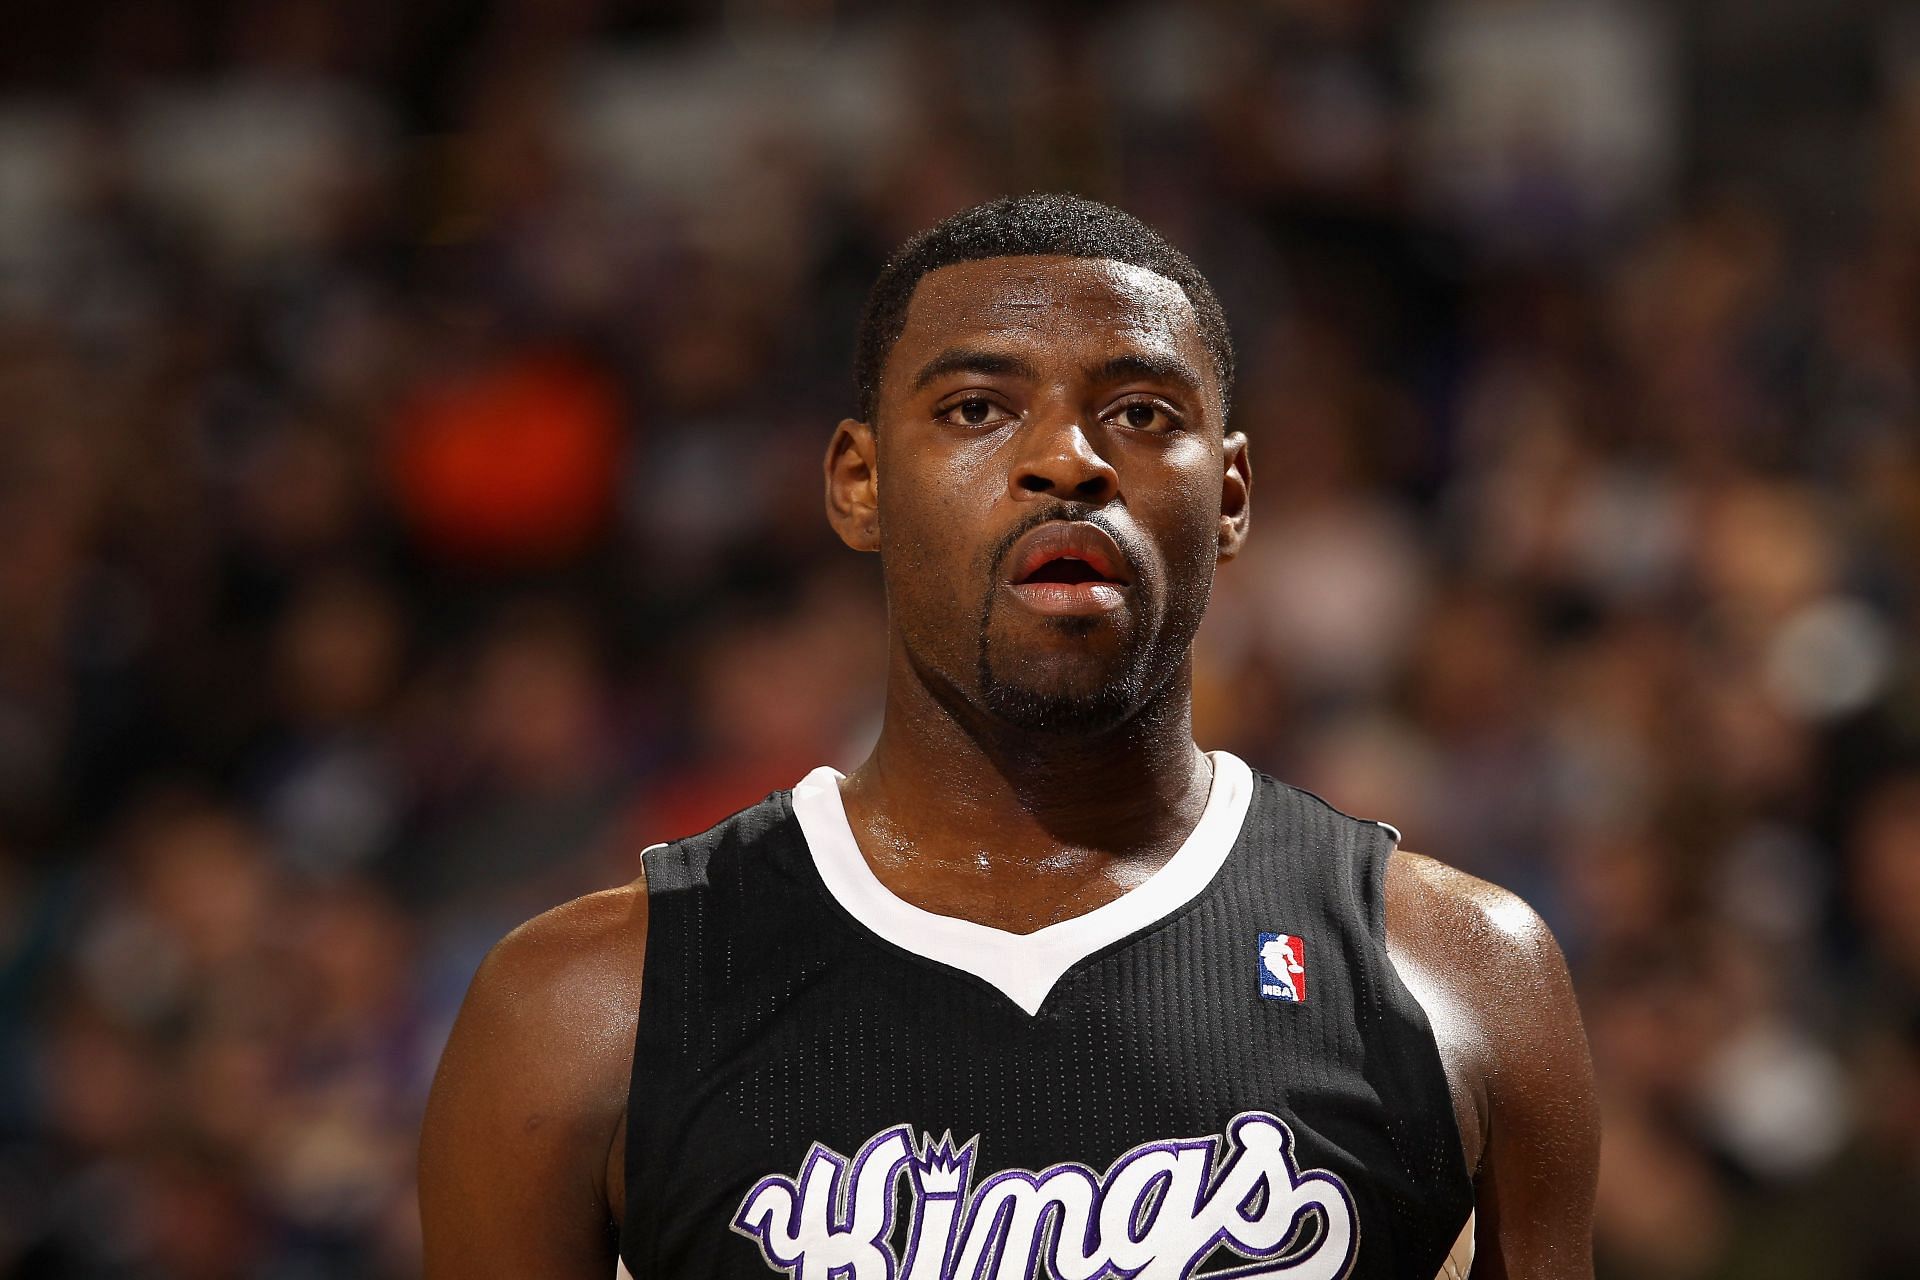 10 players that are on NBA blacklist feat. O.J. Mayo, Tyreke Evans & more